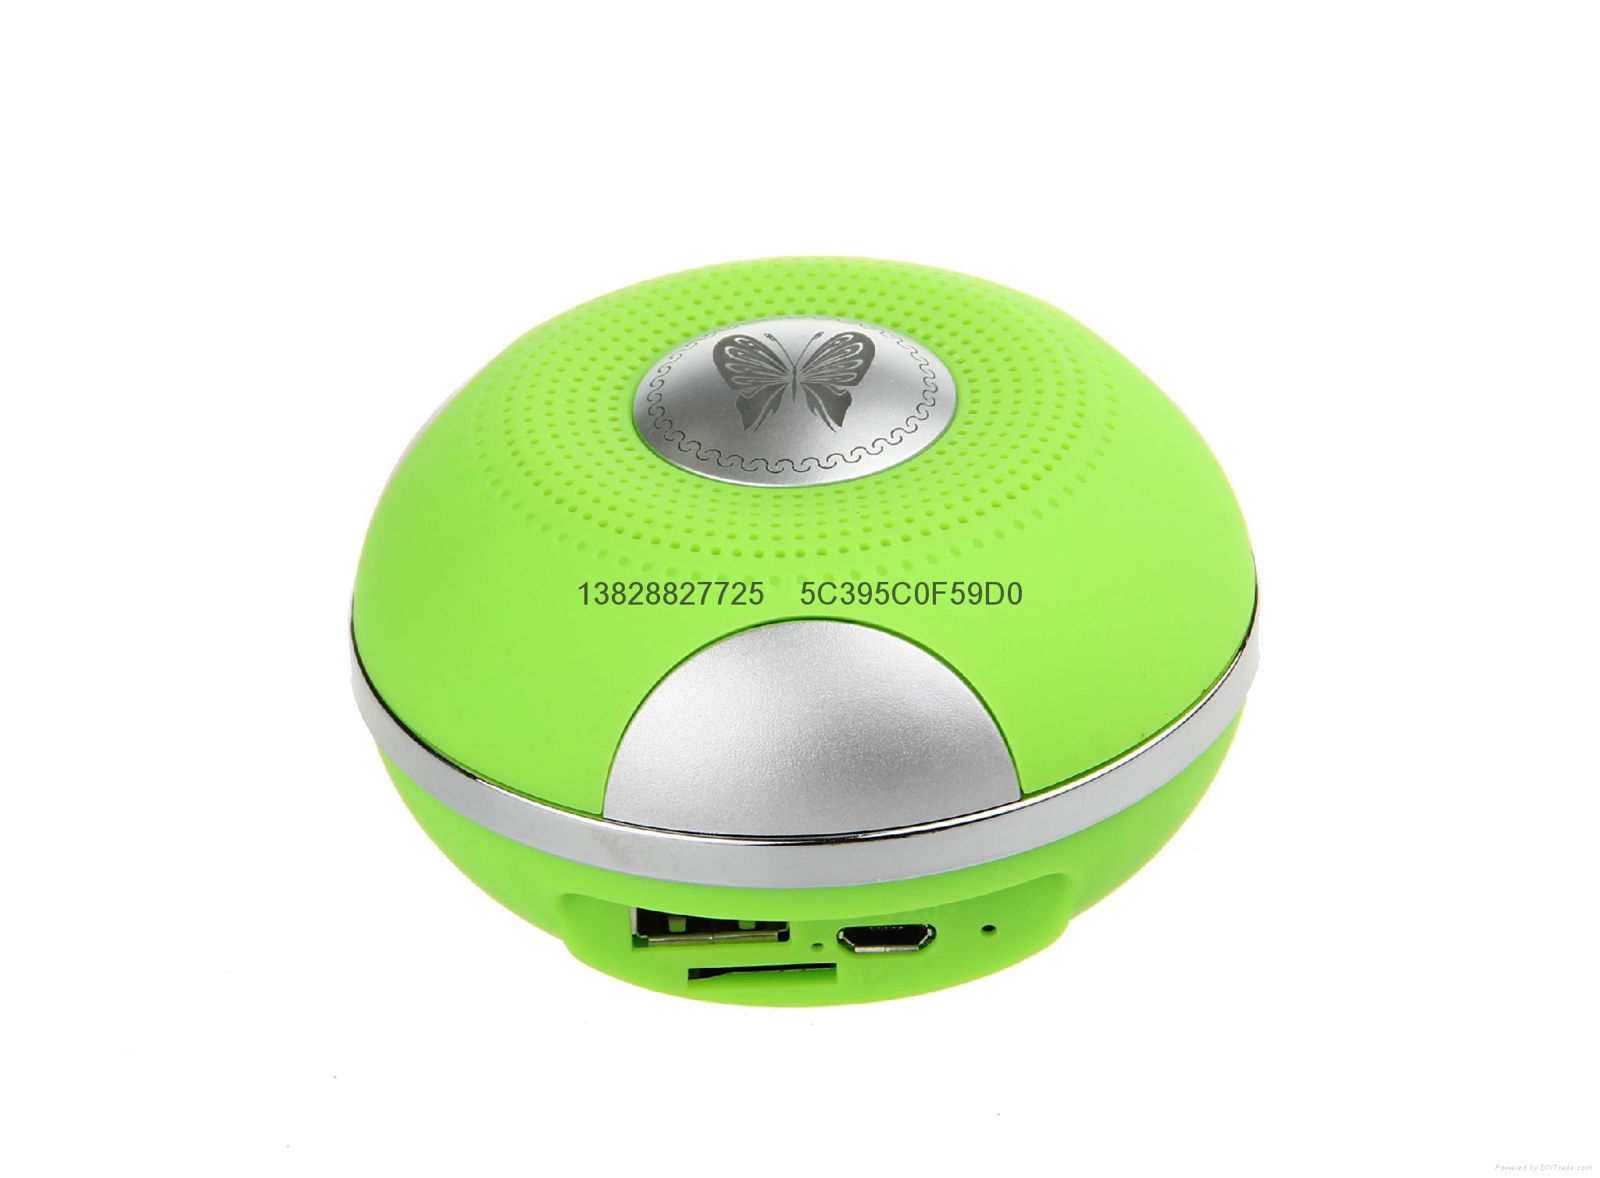 Outdoor CH-220ULED Wireless Portable Bluetooth speaker Mini TF/SD Card With MIC 